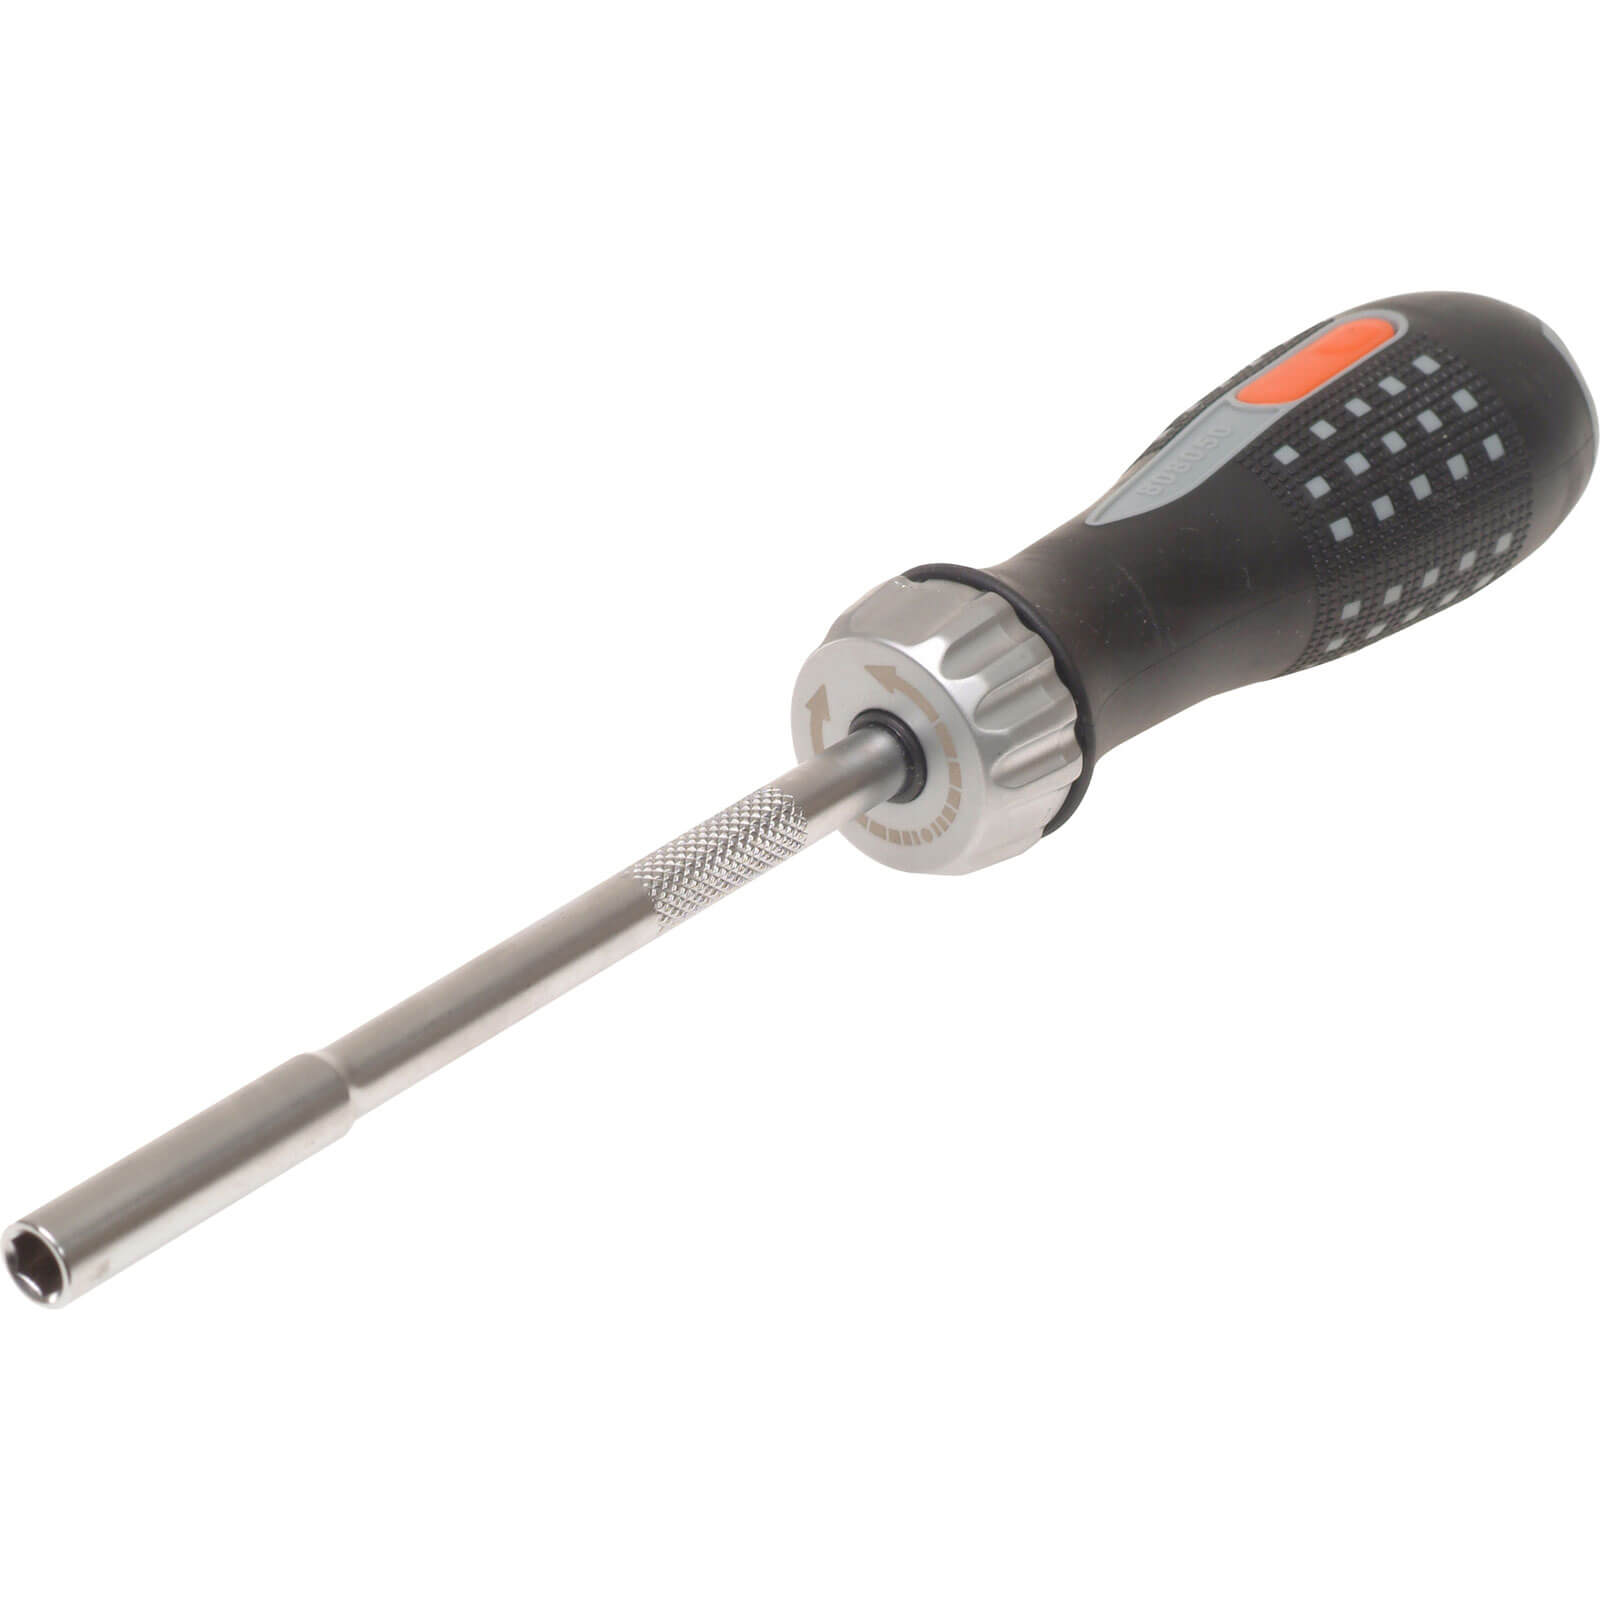 Photo of Bahco Ratchet Screwdriver And 6 Screwdriver Bits